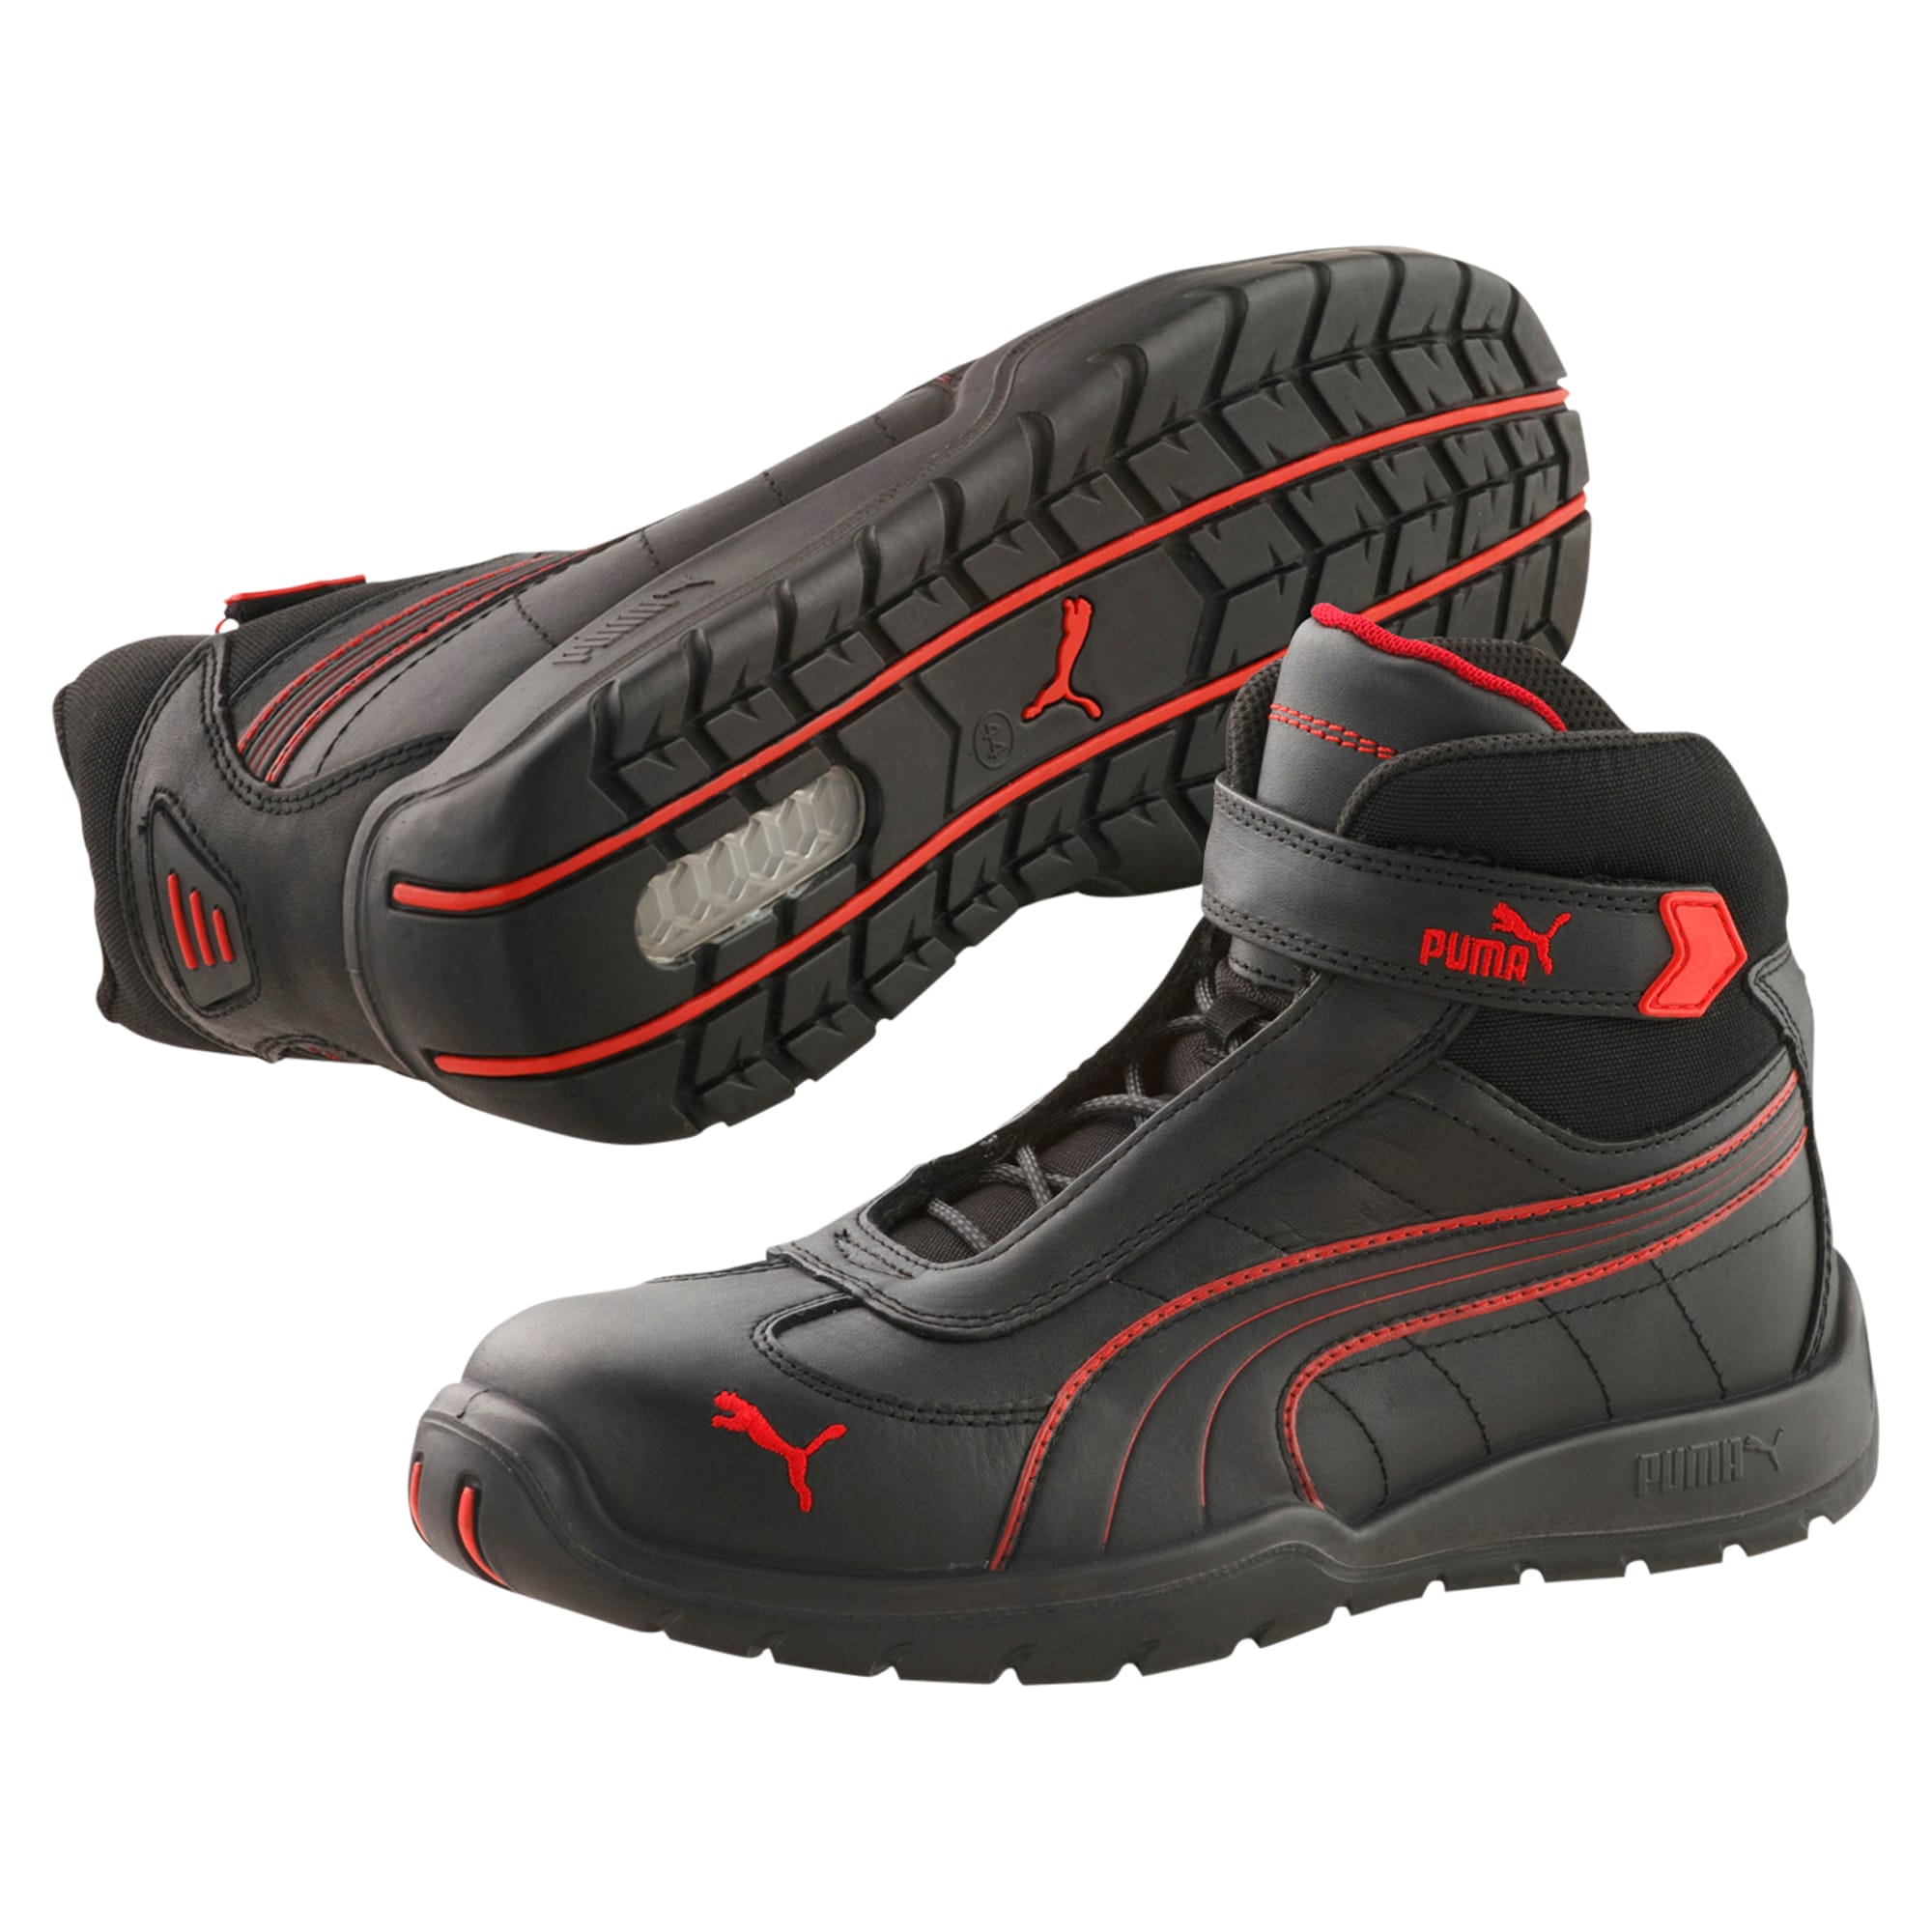 puma safety shoes s3